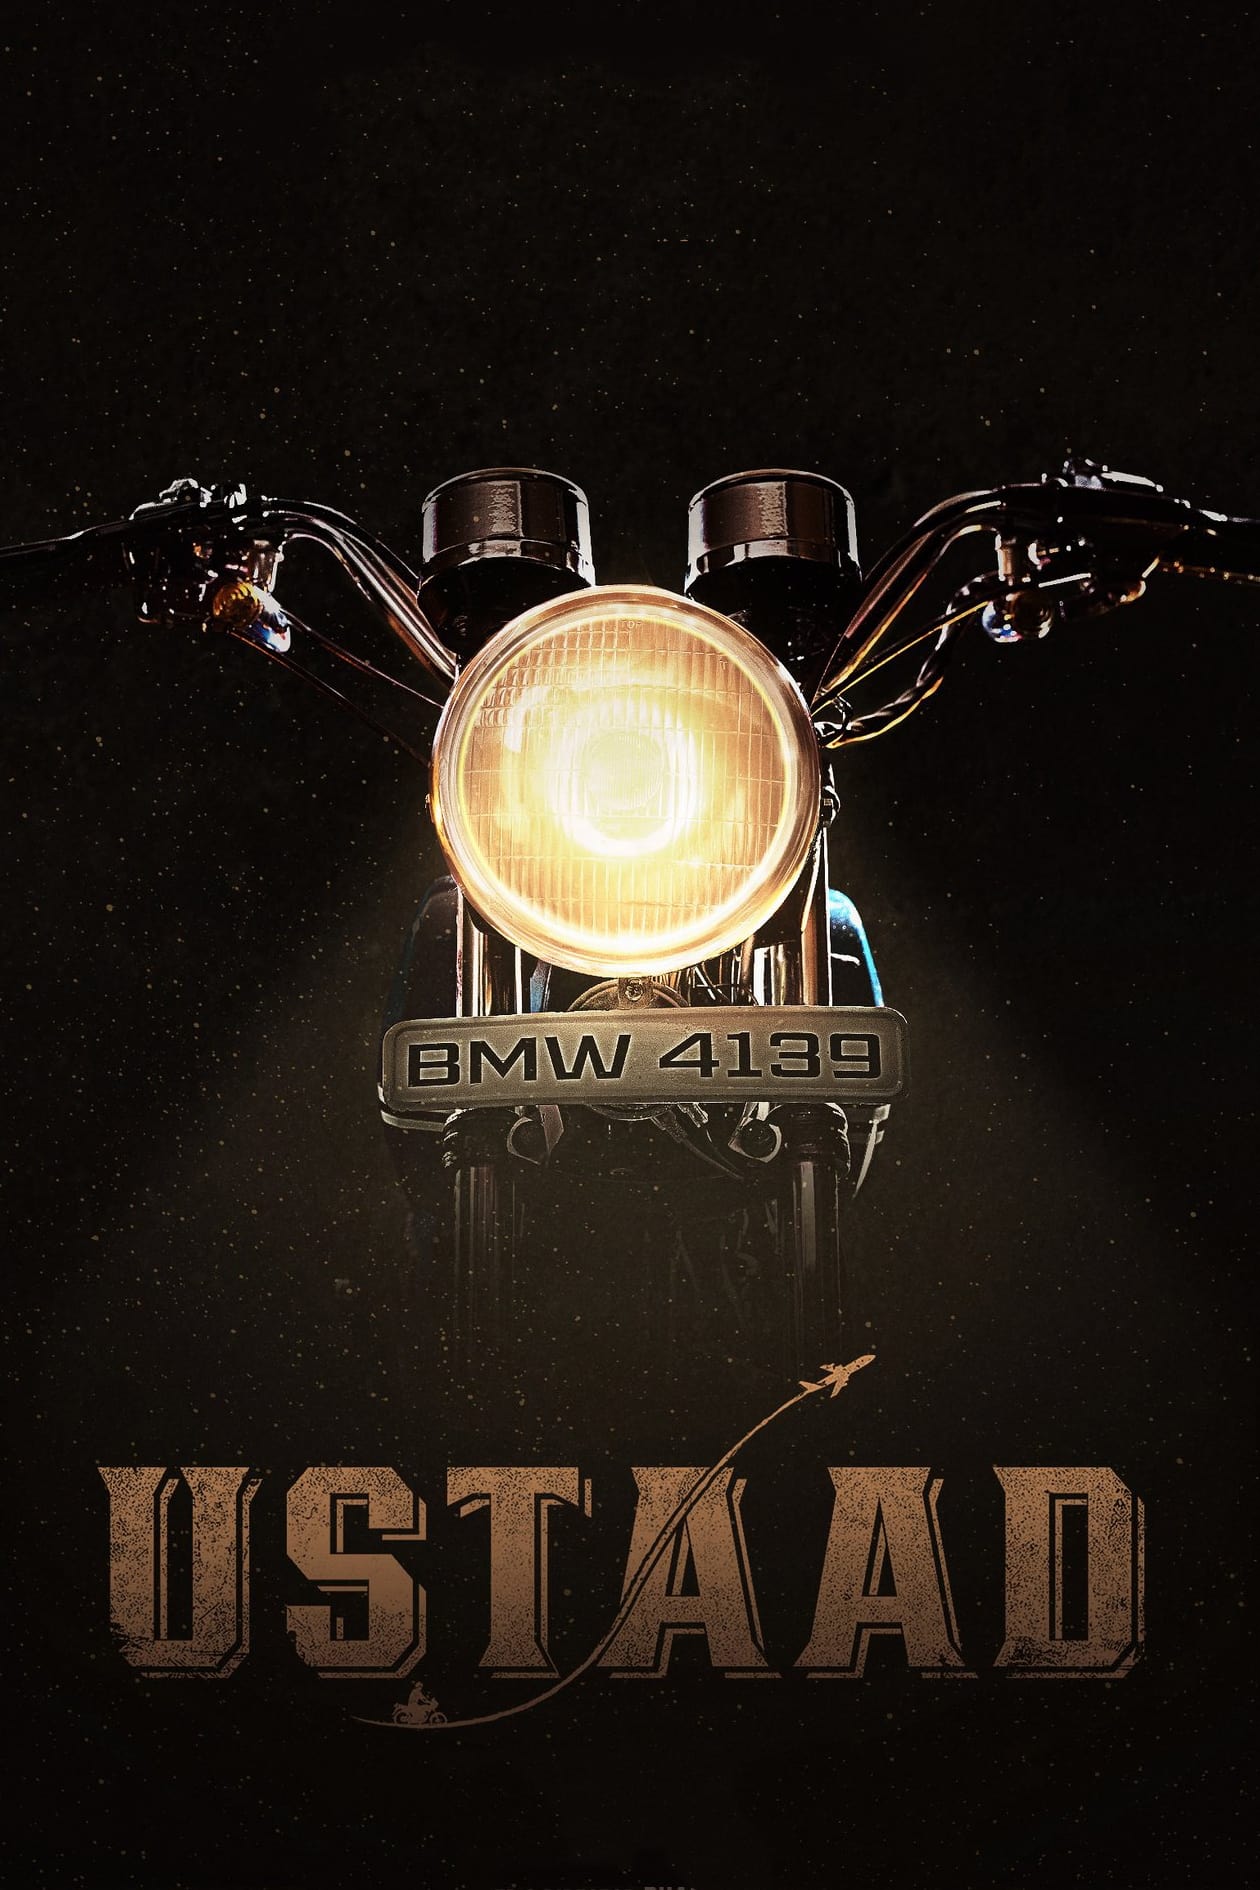 Poster for the movie "Ustaad"